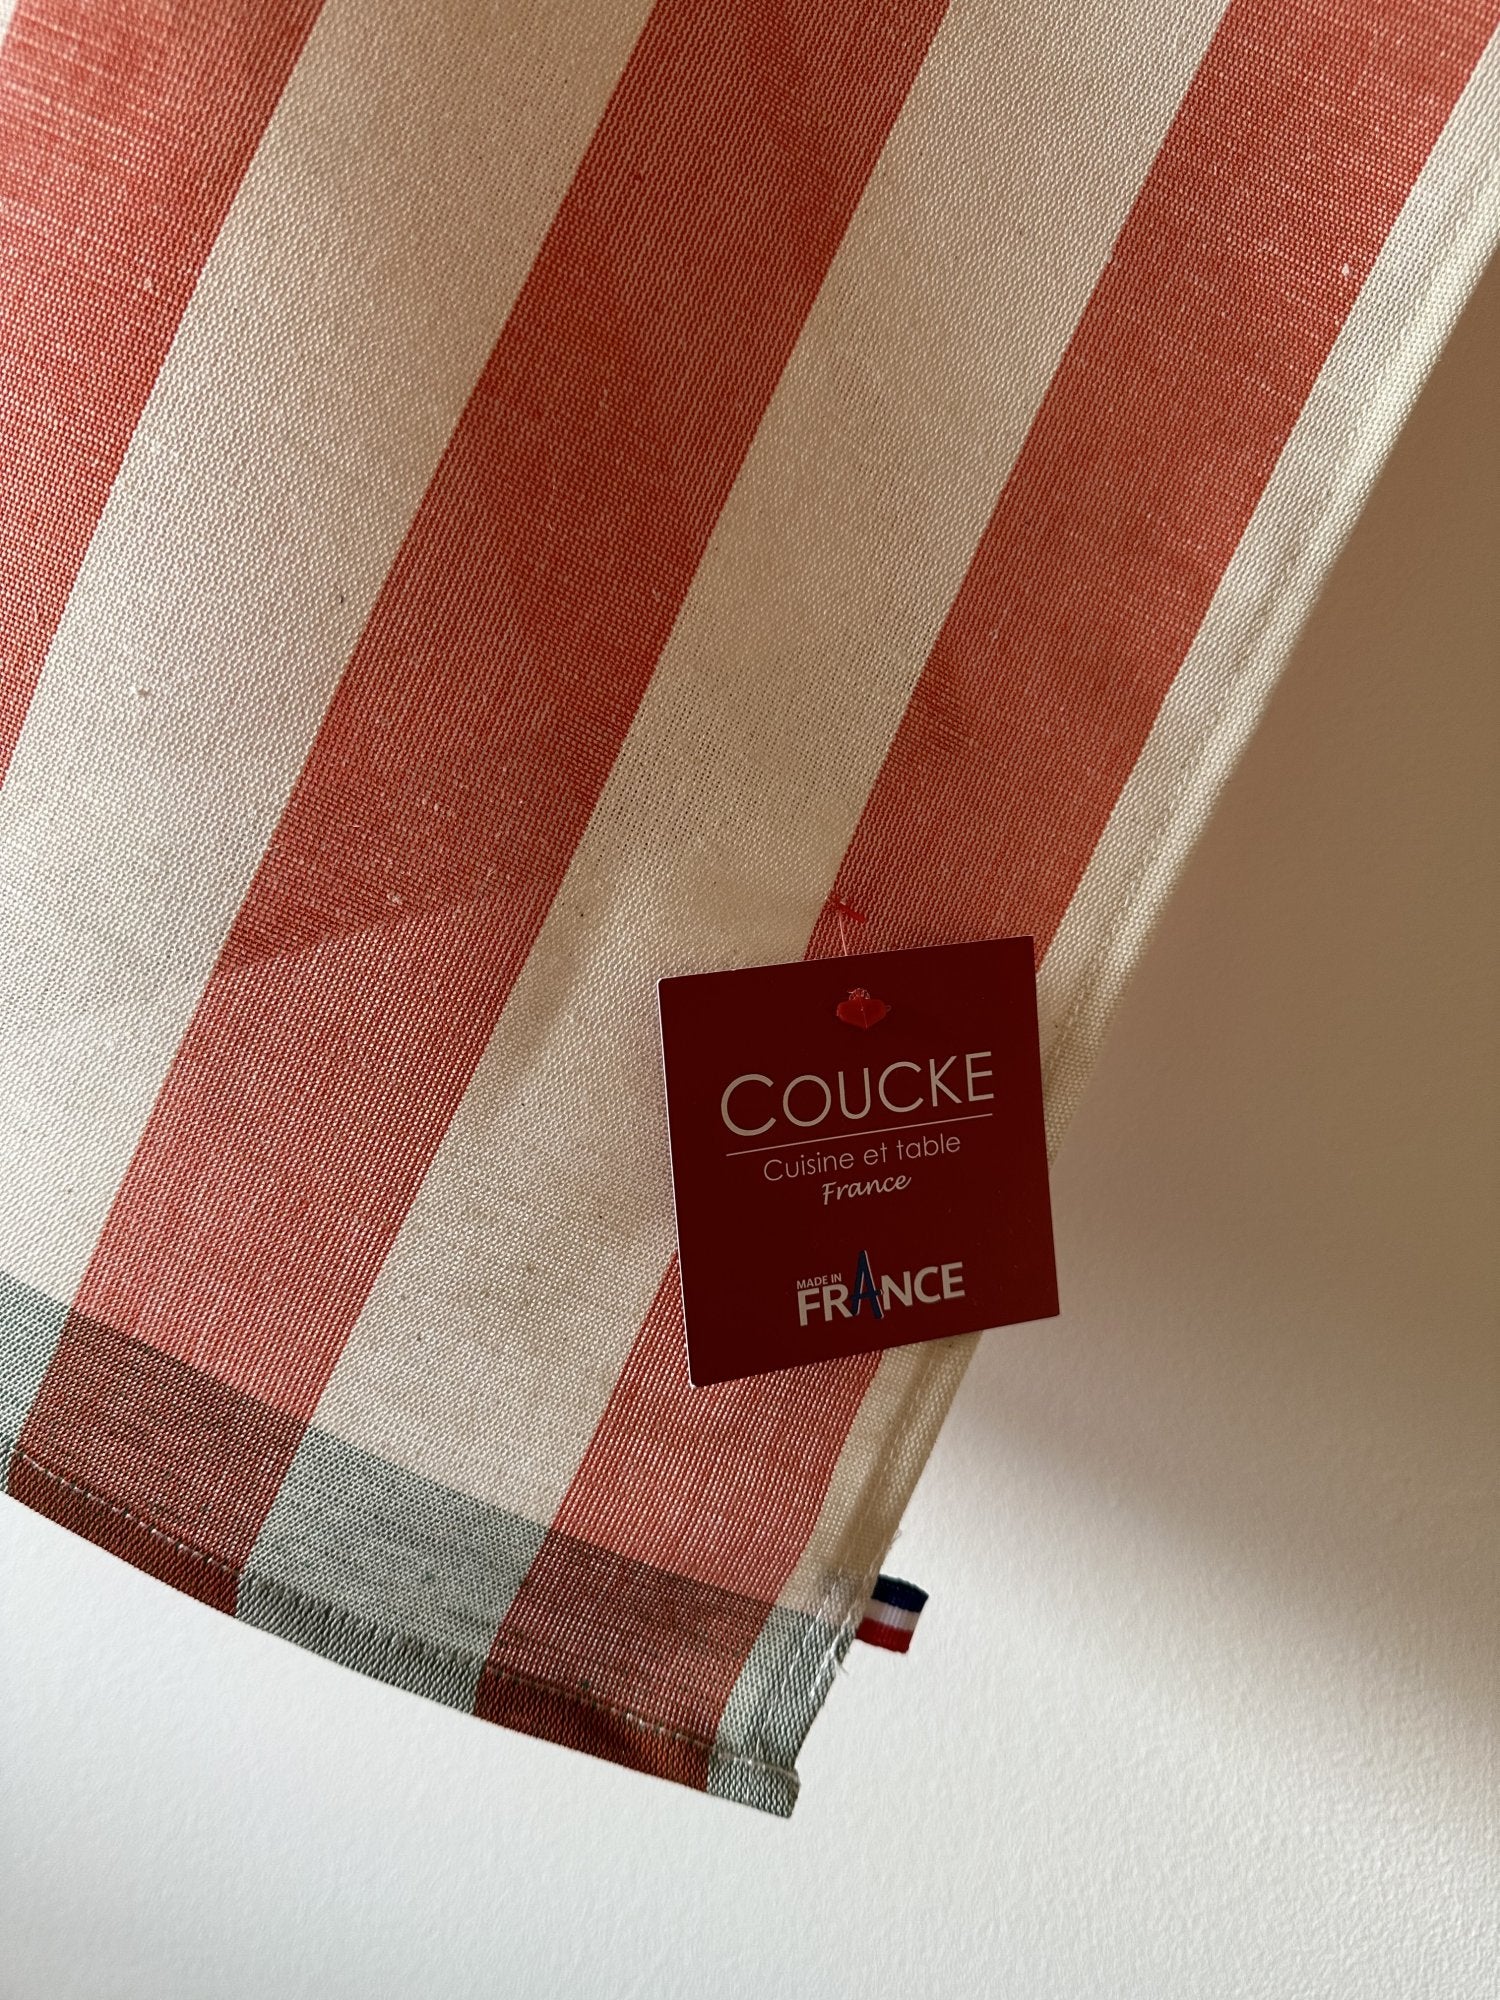 Coucke "Malo Stripe" (Red), Woven linen & cotton tea towel. Made in France.